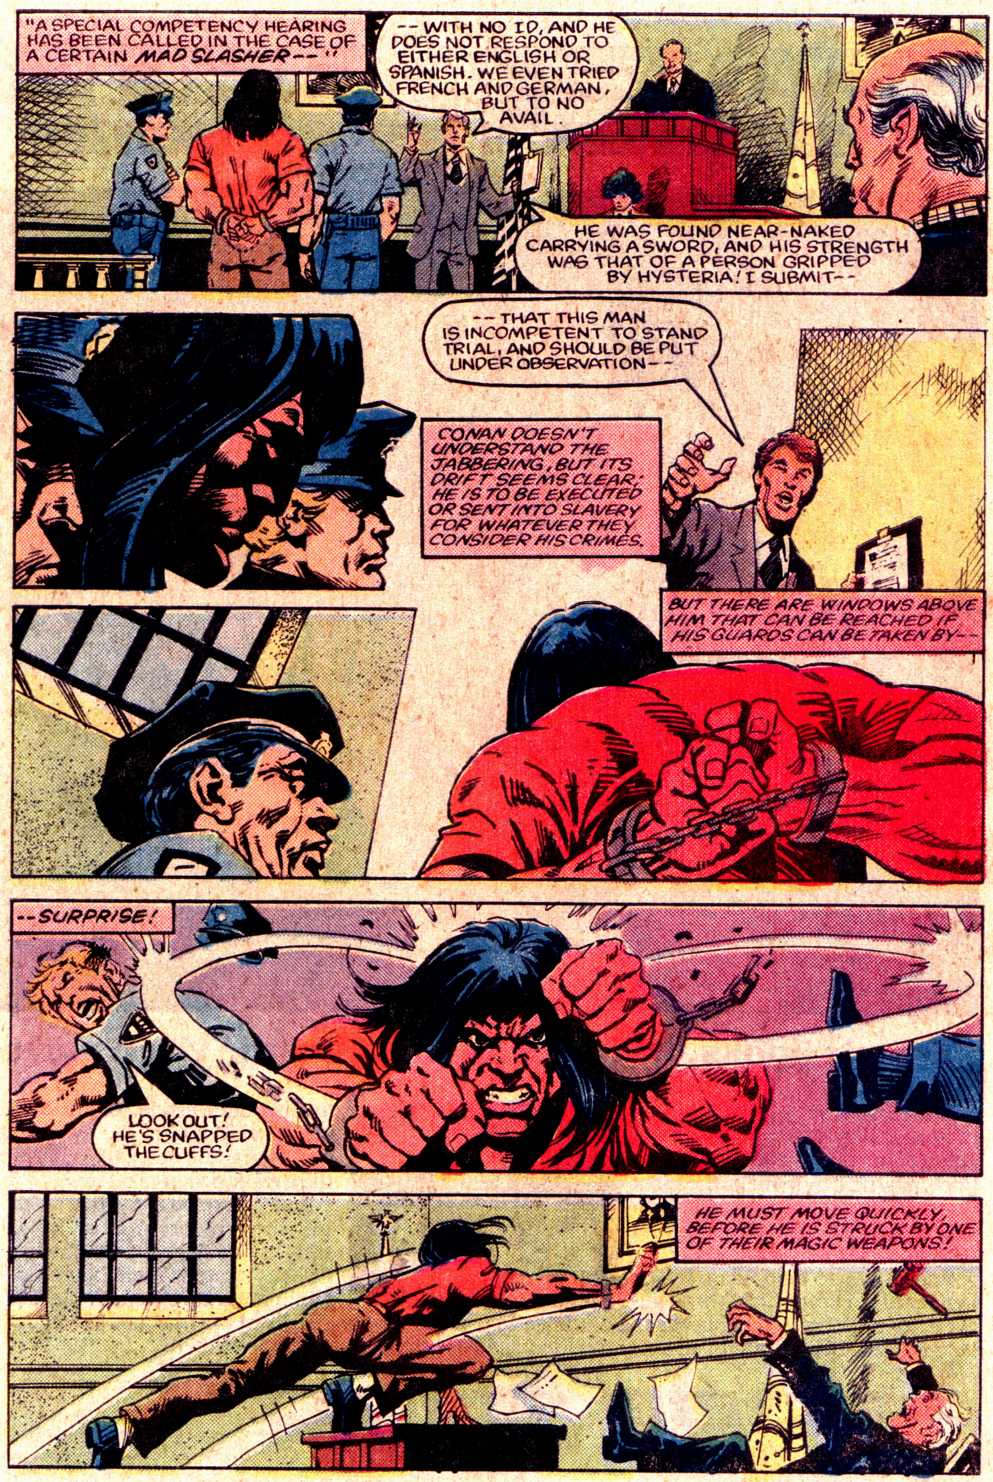 What If? (1977) issue 43 - Conan the Barbarian were stranded in the 20th century - Page 5